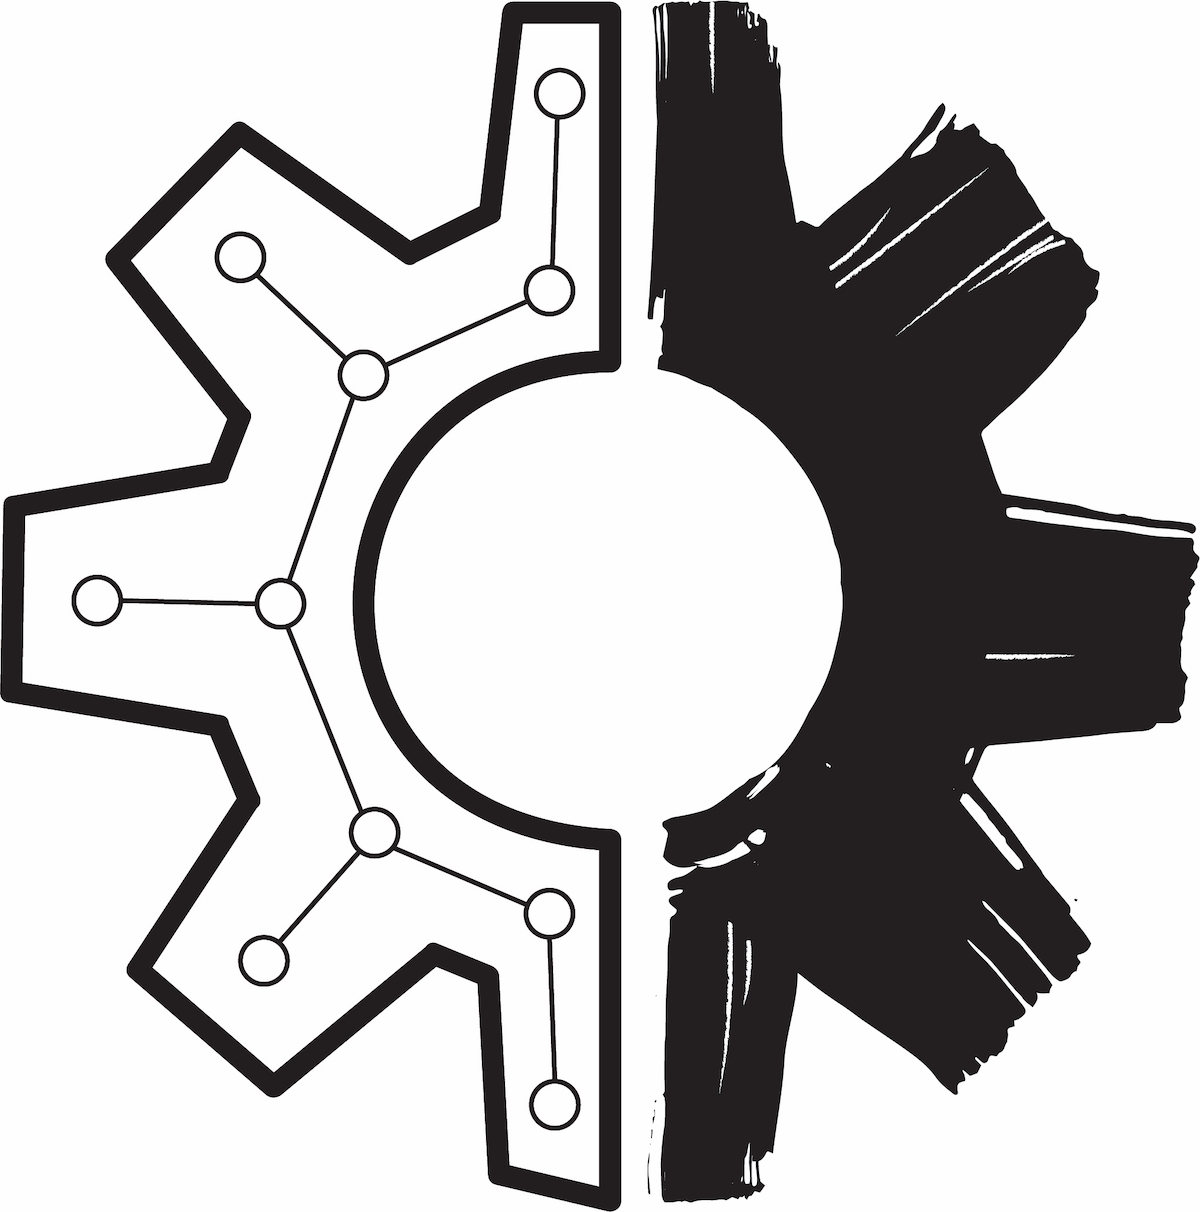 LAHS Academy of Engineering and Design logo